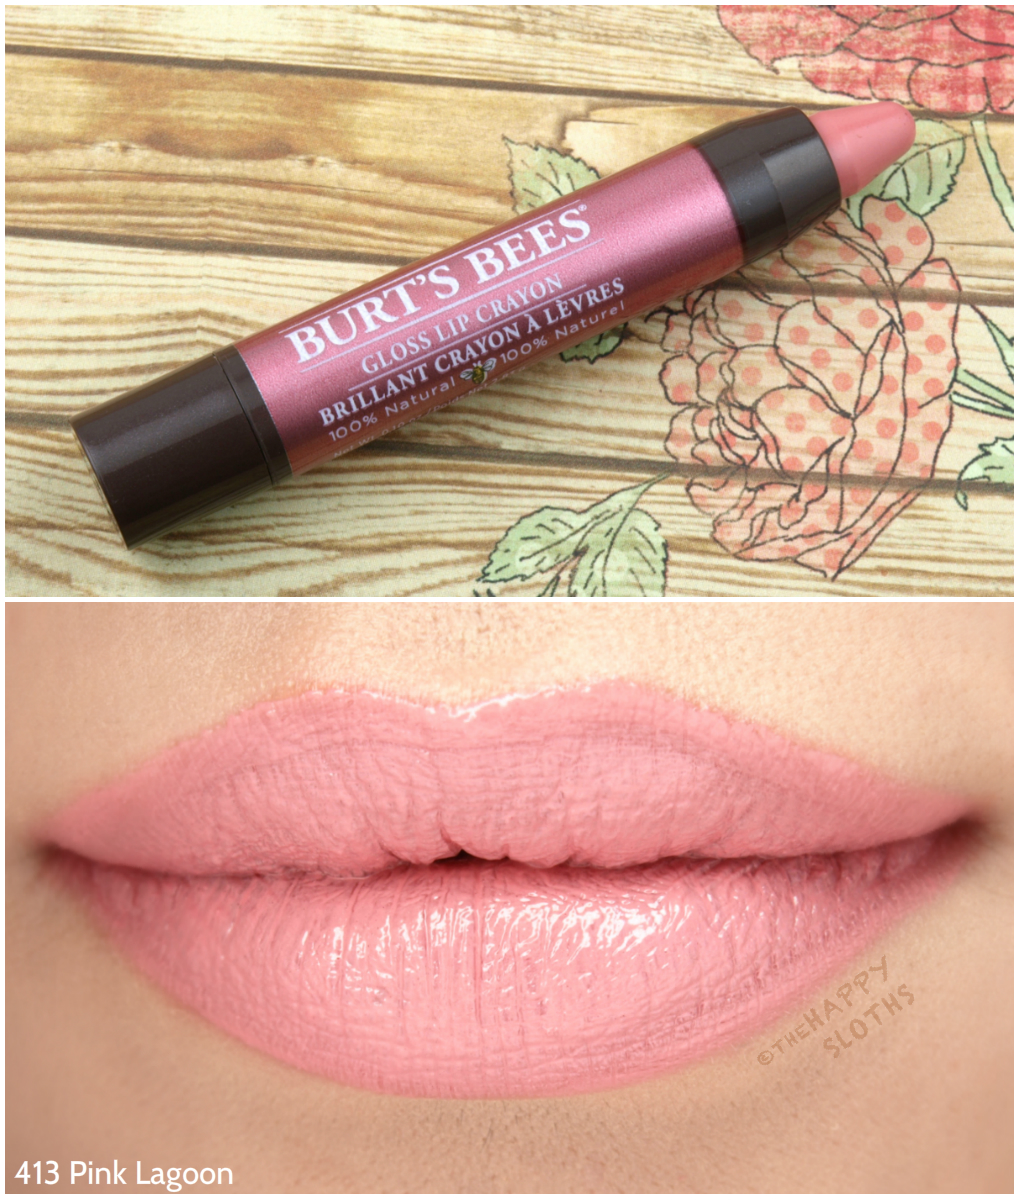 Burt's Bees Gloss Lip Crayon in 413 Pink Lagoon: Review and Swatches